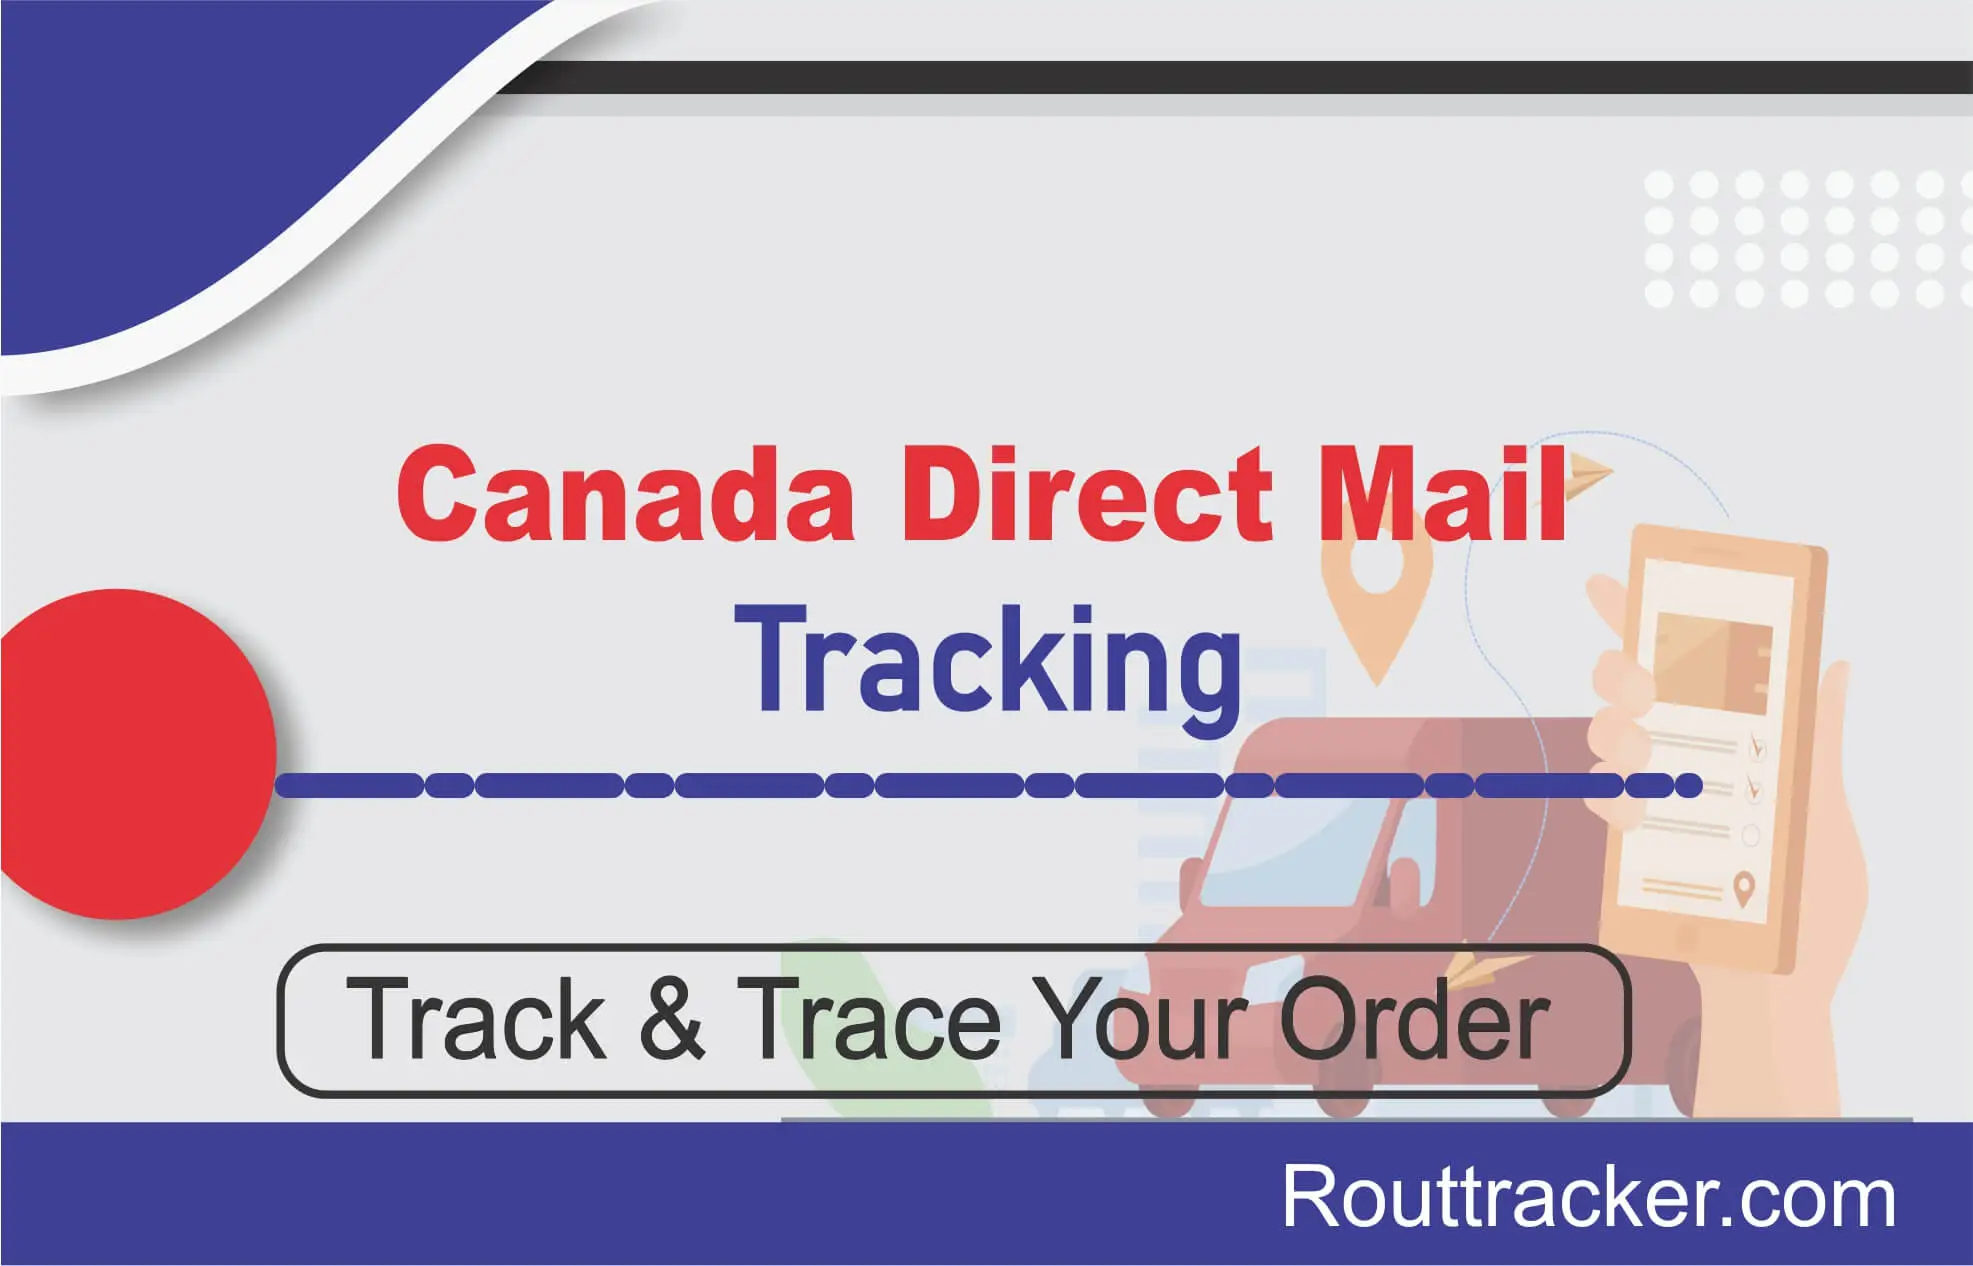 Canada Direct Mail Tracking